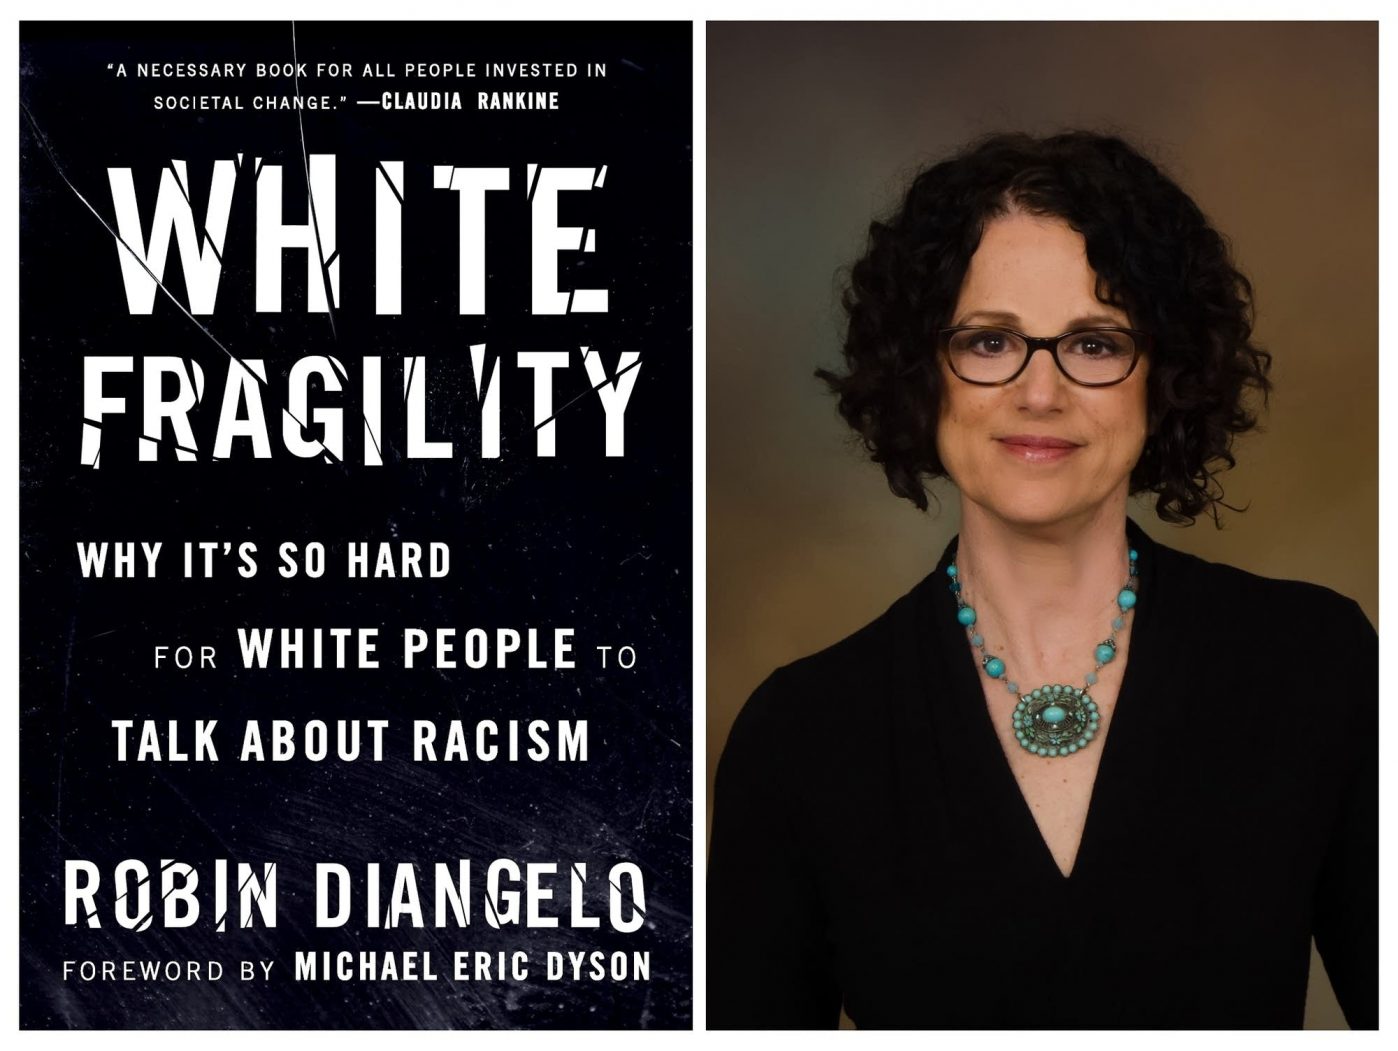 Calling white privilege out for what it is, Yvonne Ridley admits to feeling uncomfortable while reading Robin DiAngelo's book White Fragility